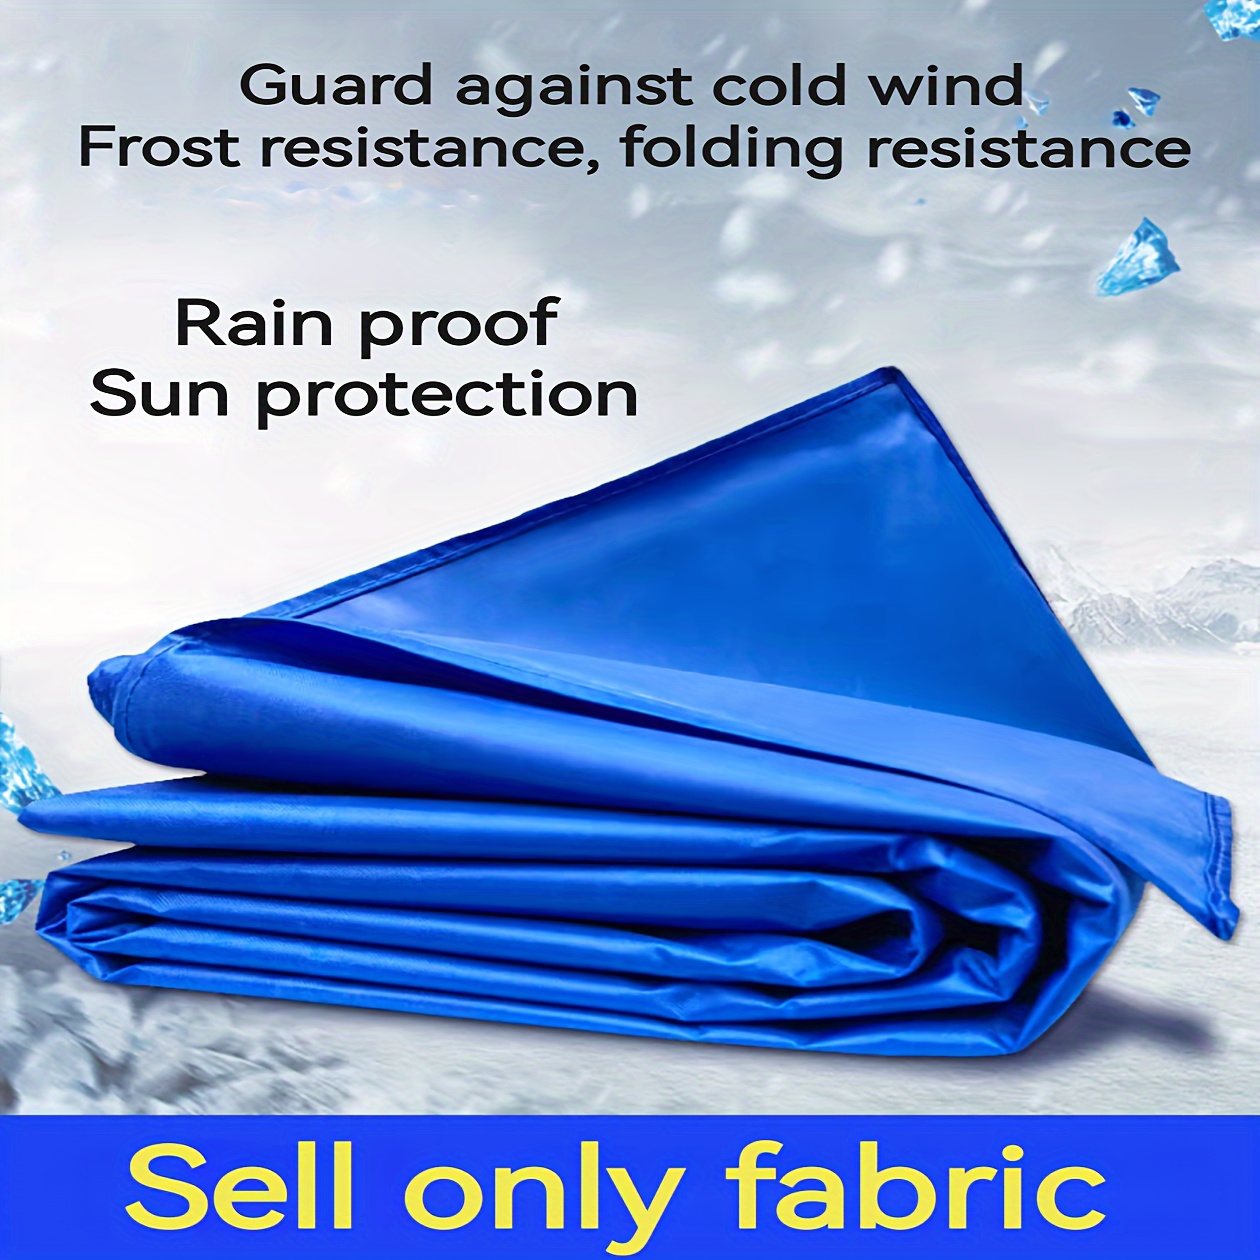 

1pc Durable Sunshade Cloth, 118.1in X 76.7in, Outdoor Shade Fabric, Windproof & Waterproof, Blue Tent Side Panel For Market Stalls (no Top Cover, No Frame)